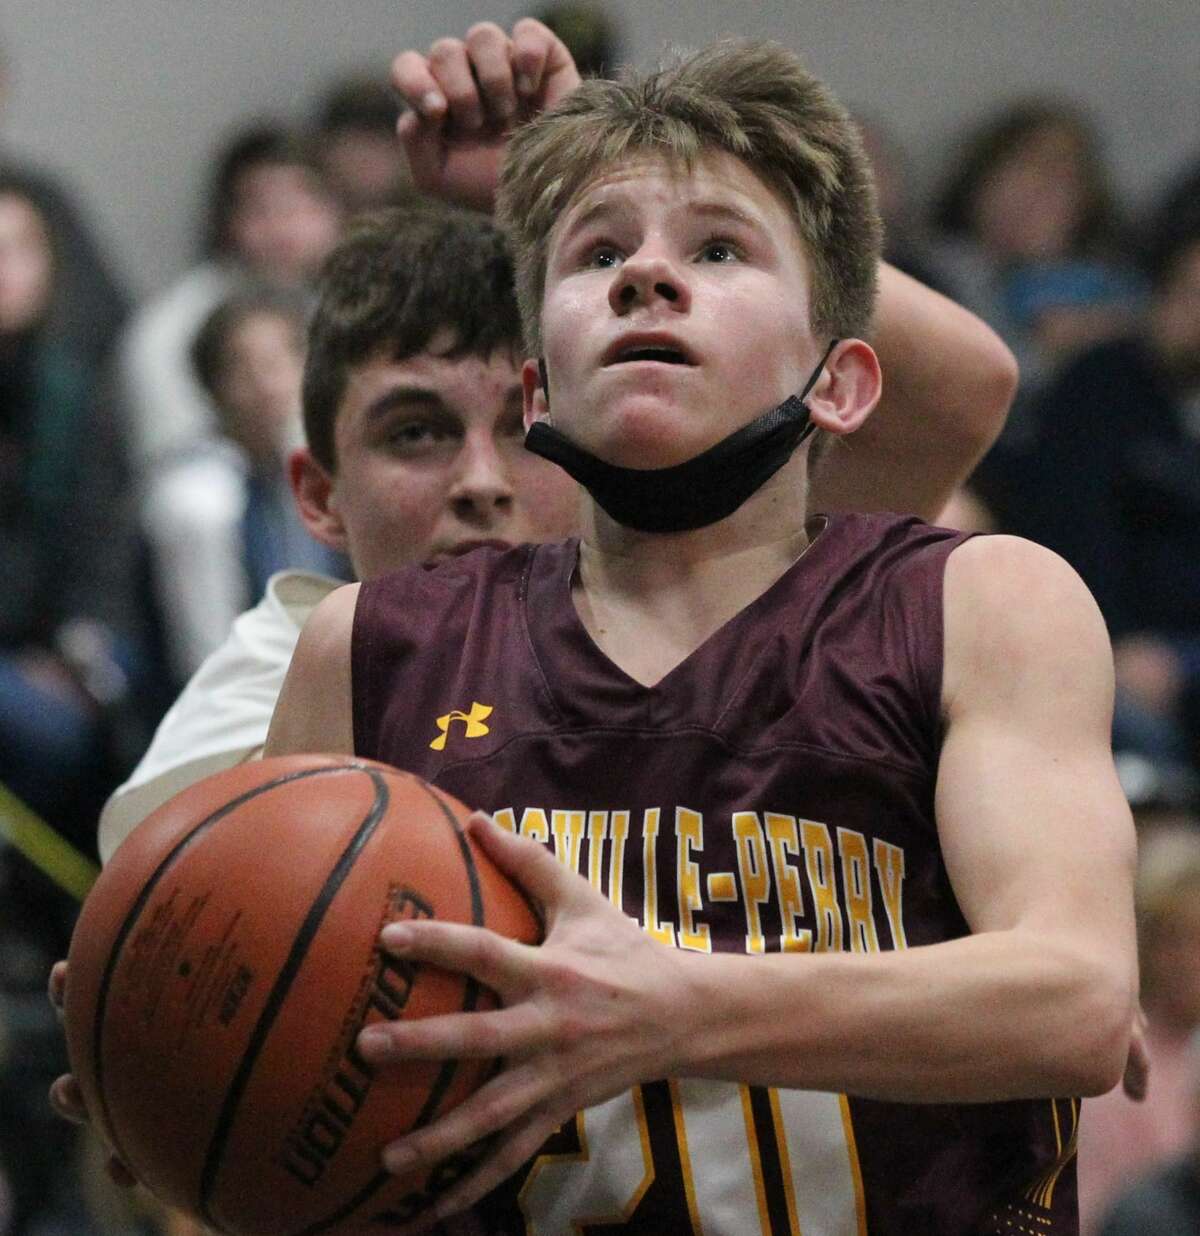 Action from the West Central boys' basketball team's win over Griggsville-Perry in the first round of the Winchester Invitational Tournament on Saturday